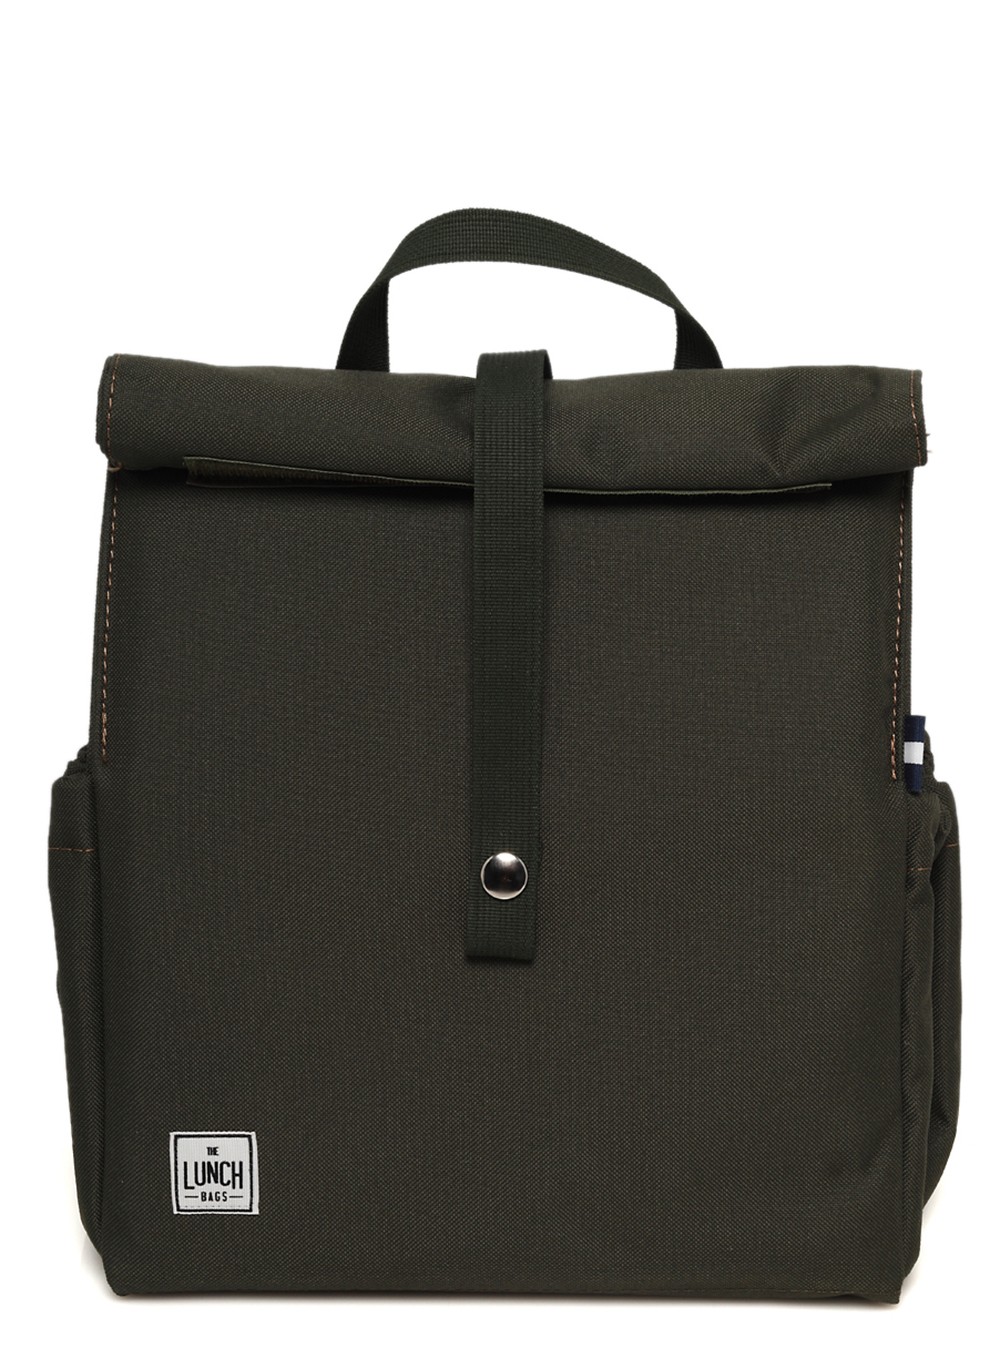 Plecak The Lunch Bags Lunchpack - olive